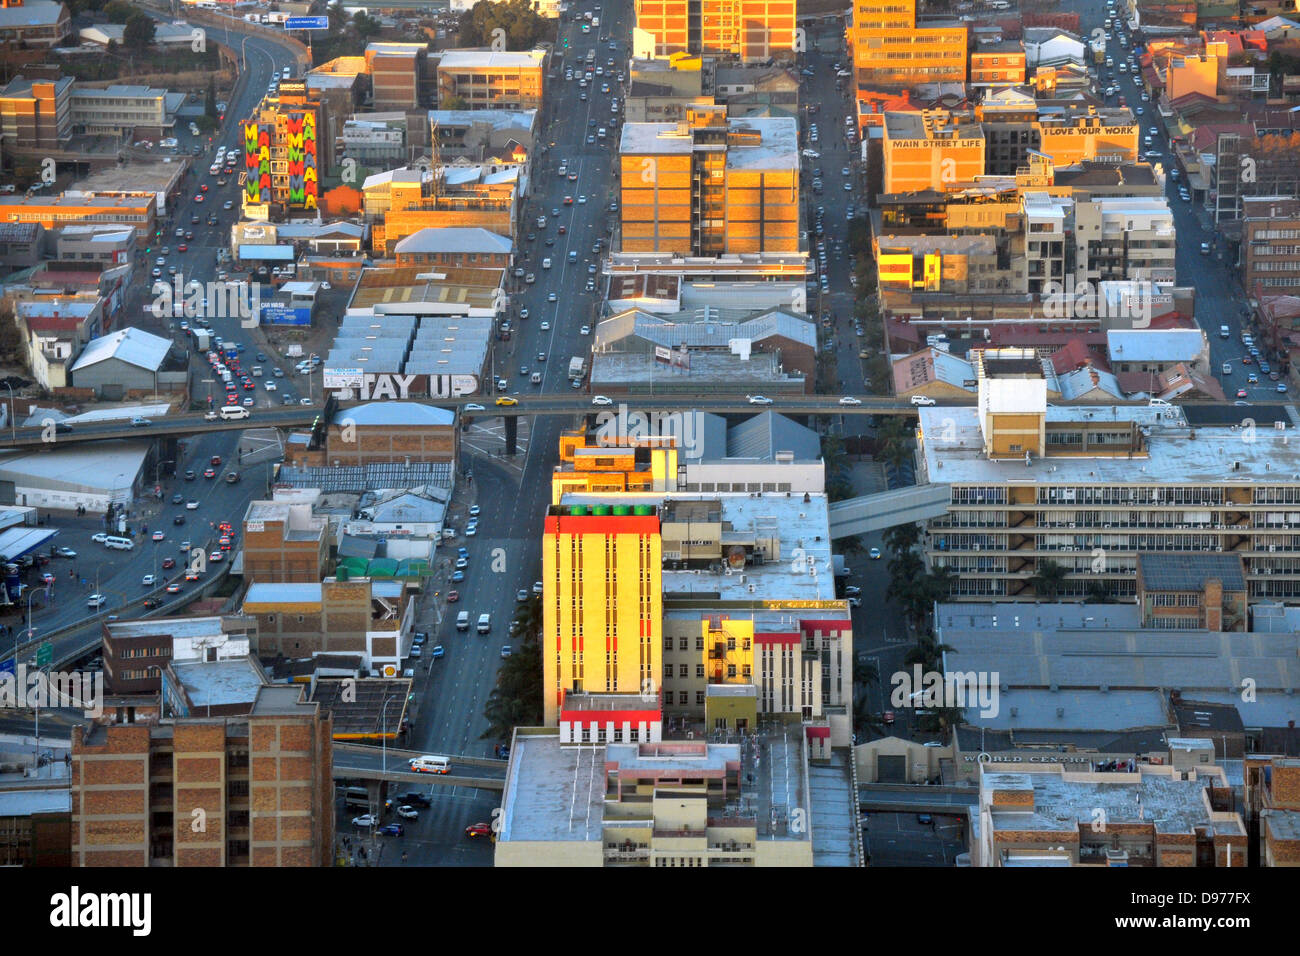 A view of the streets of Johannesburg seen from the top of a tall skyscraper. Stock Photo